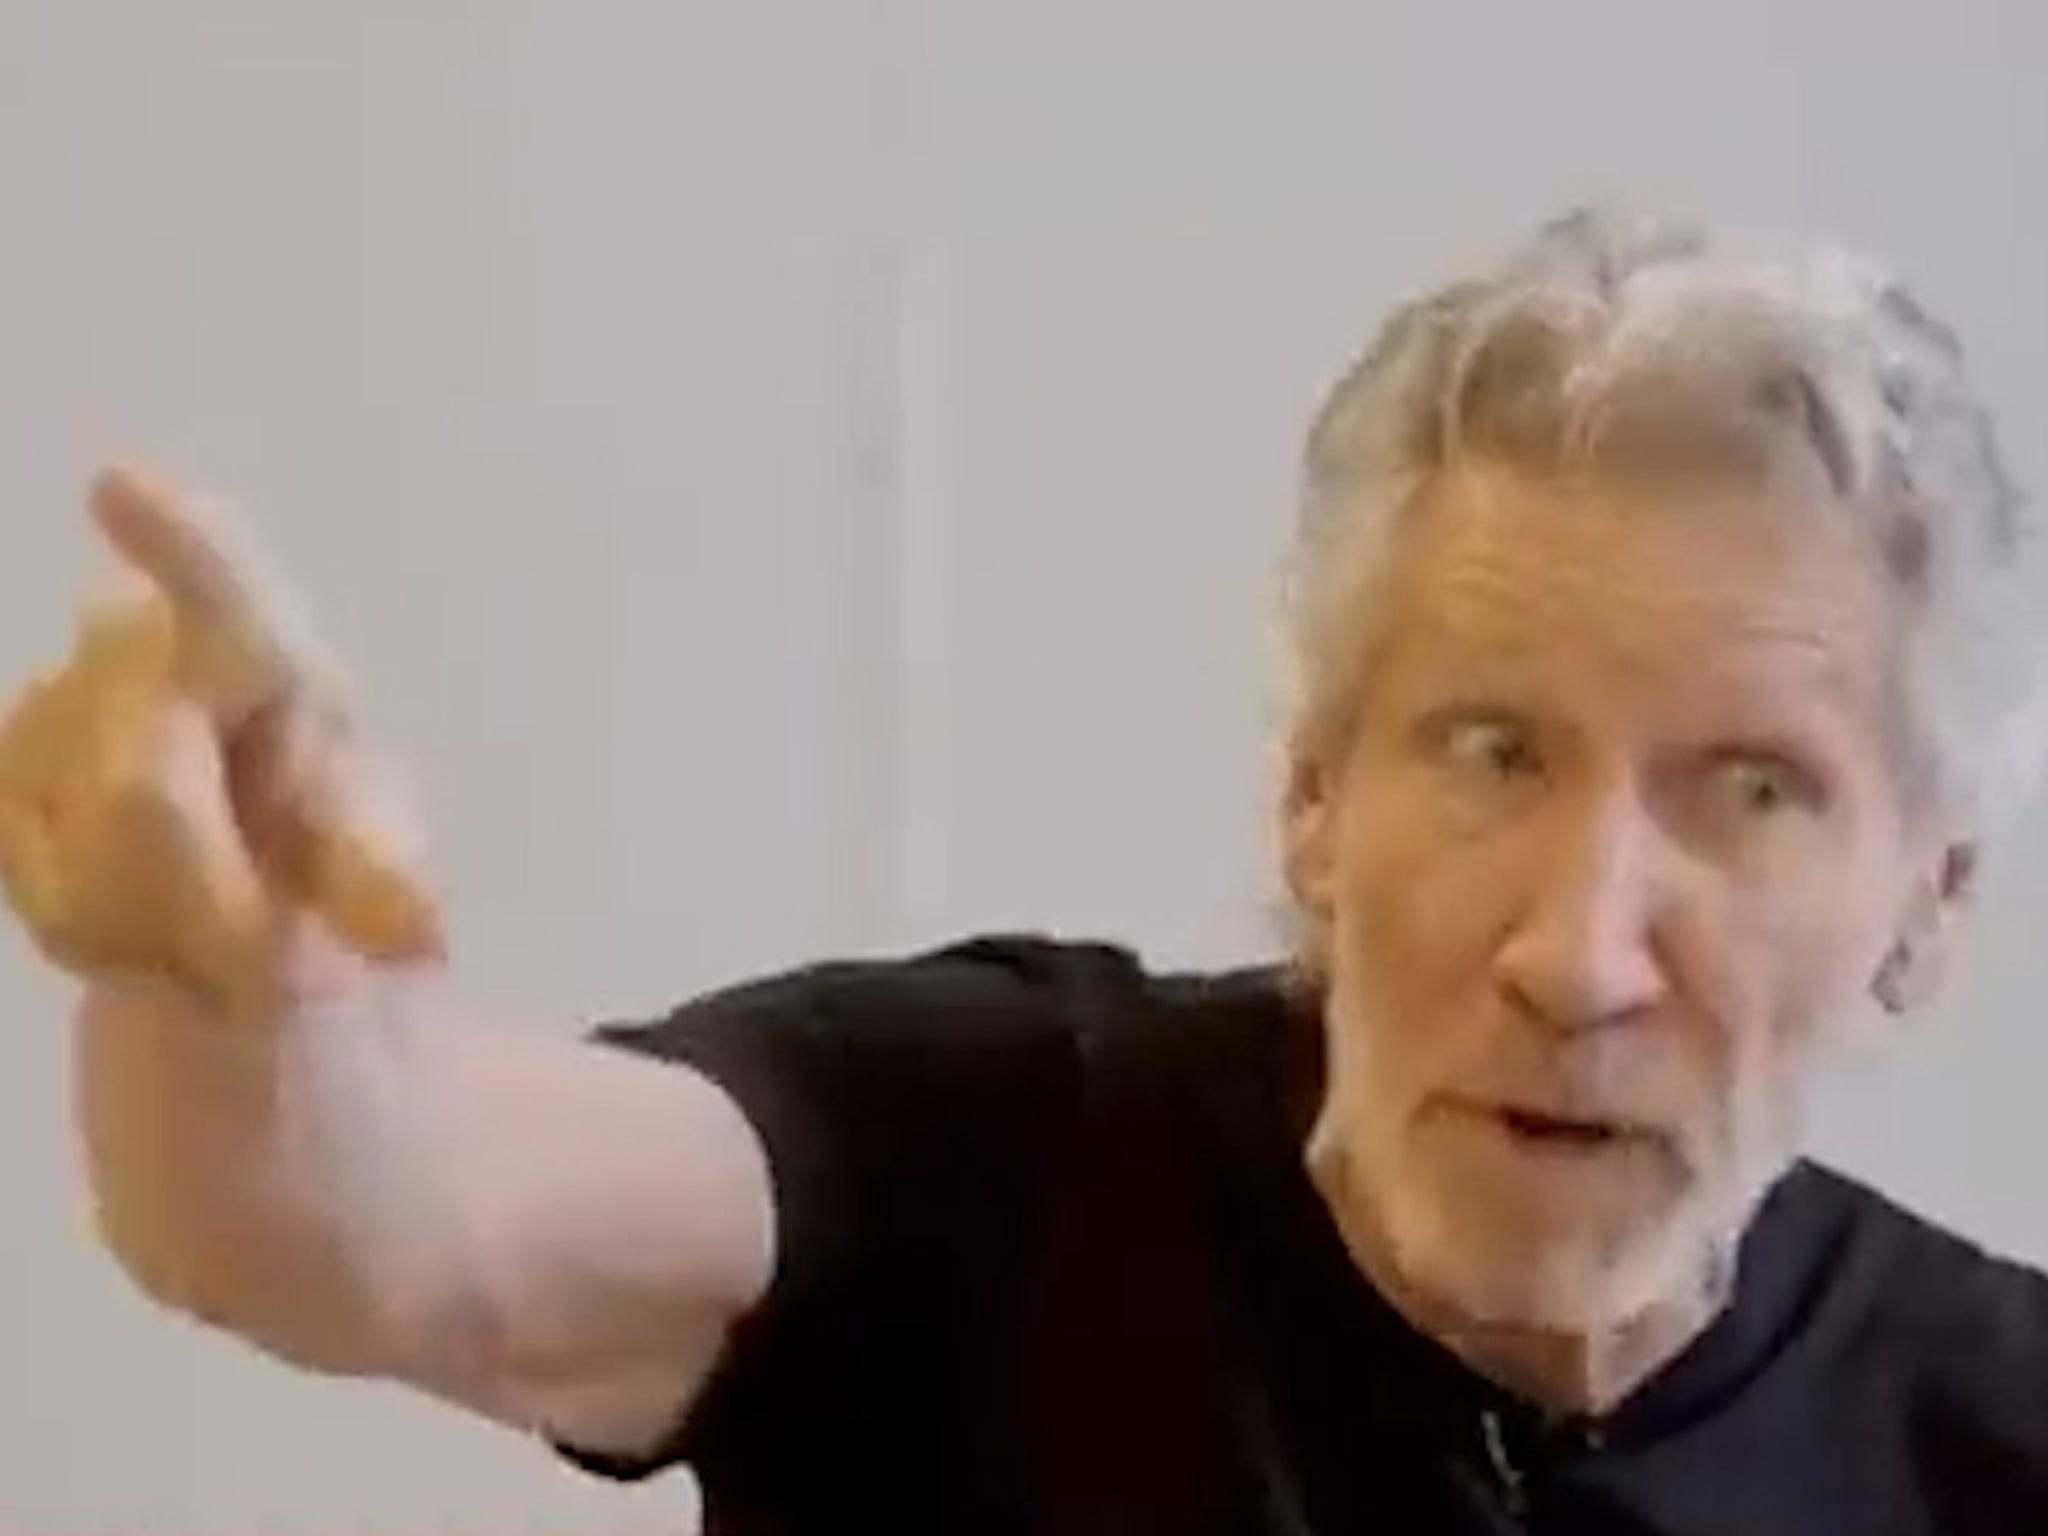 Pink Floyd's Roger Waters Argues with CNN Host Over Ukraine, China